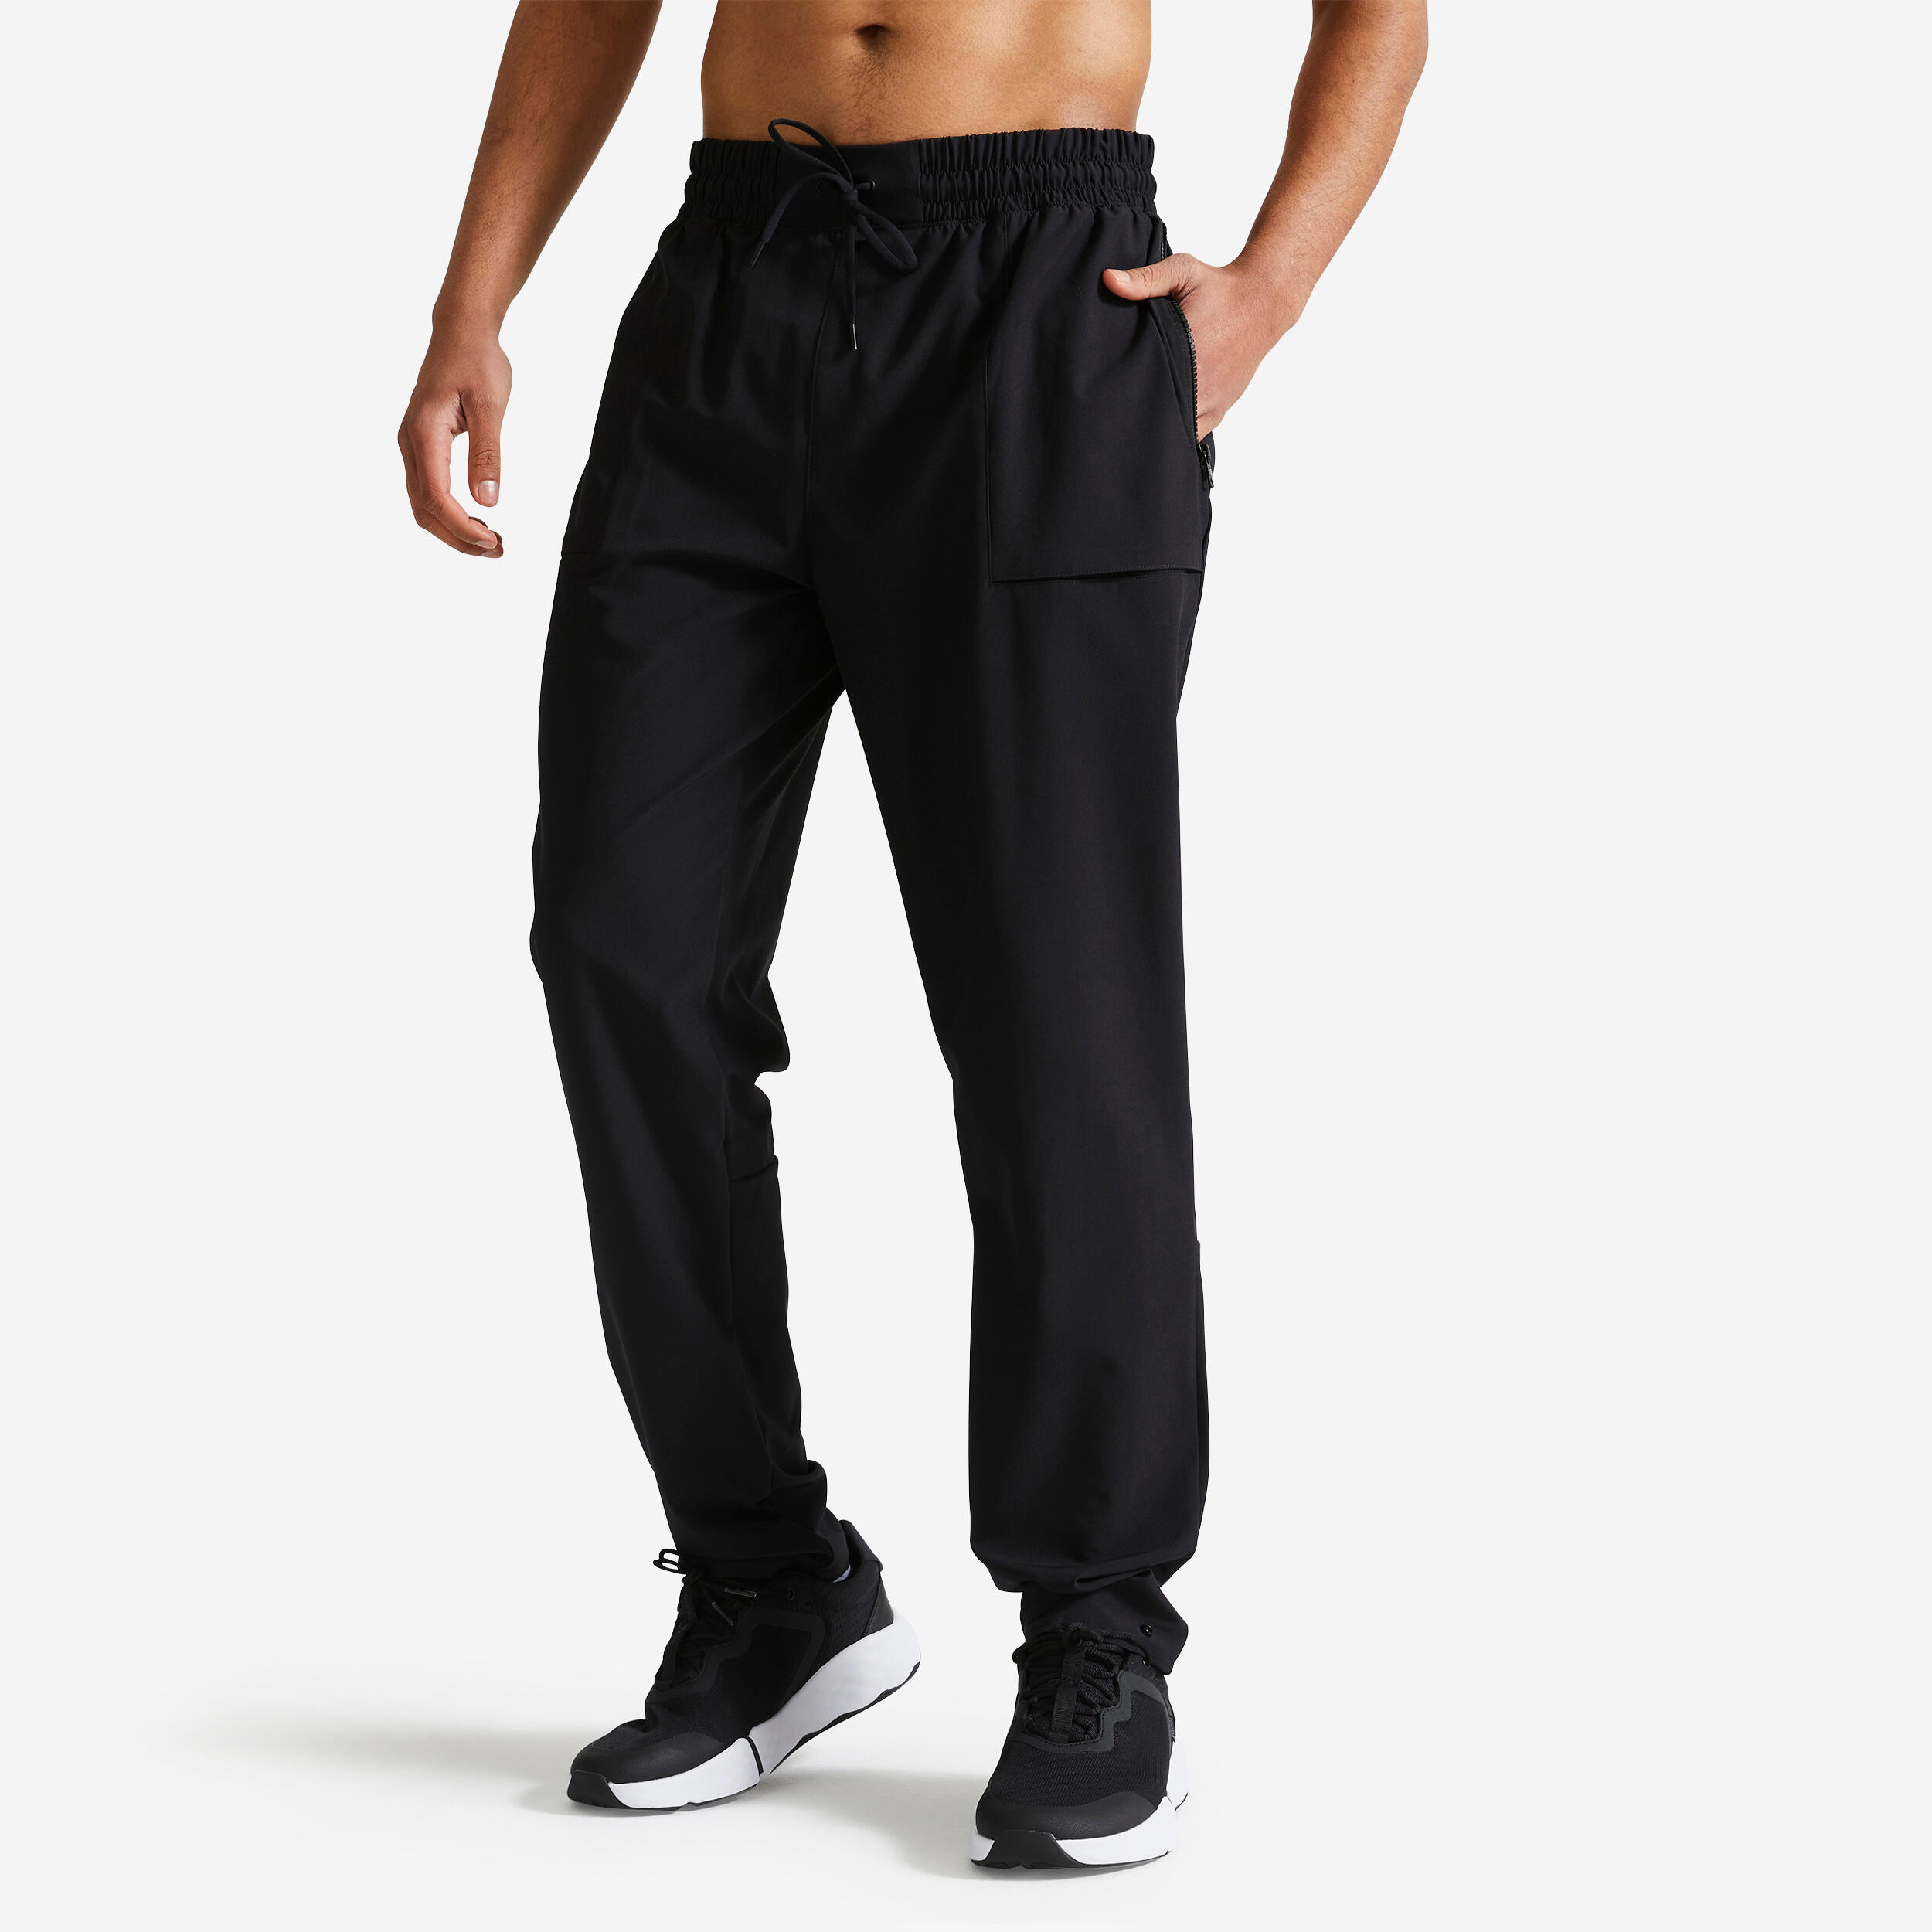 DOMYOS Men's Breathable Fitness Collection Bottoms - Black